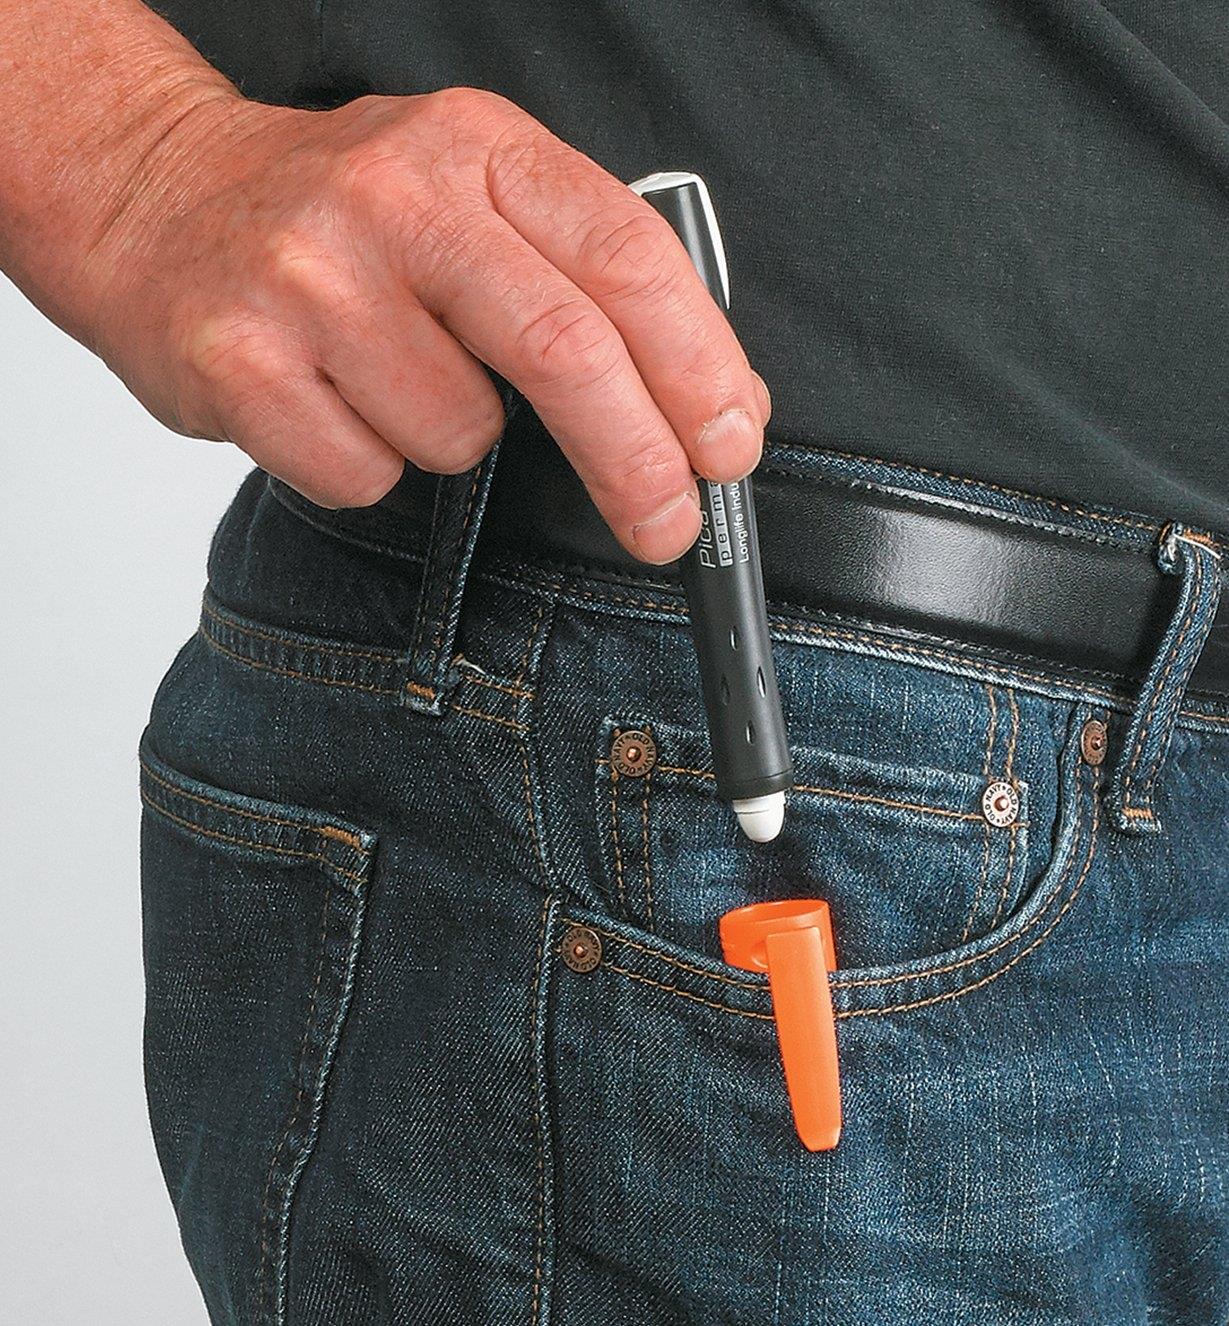 Carrying a Pica-Visor White Marking Crayon holster in a pants pocket